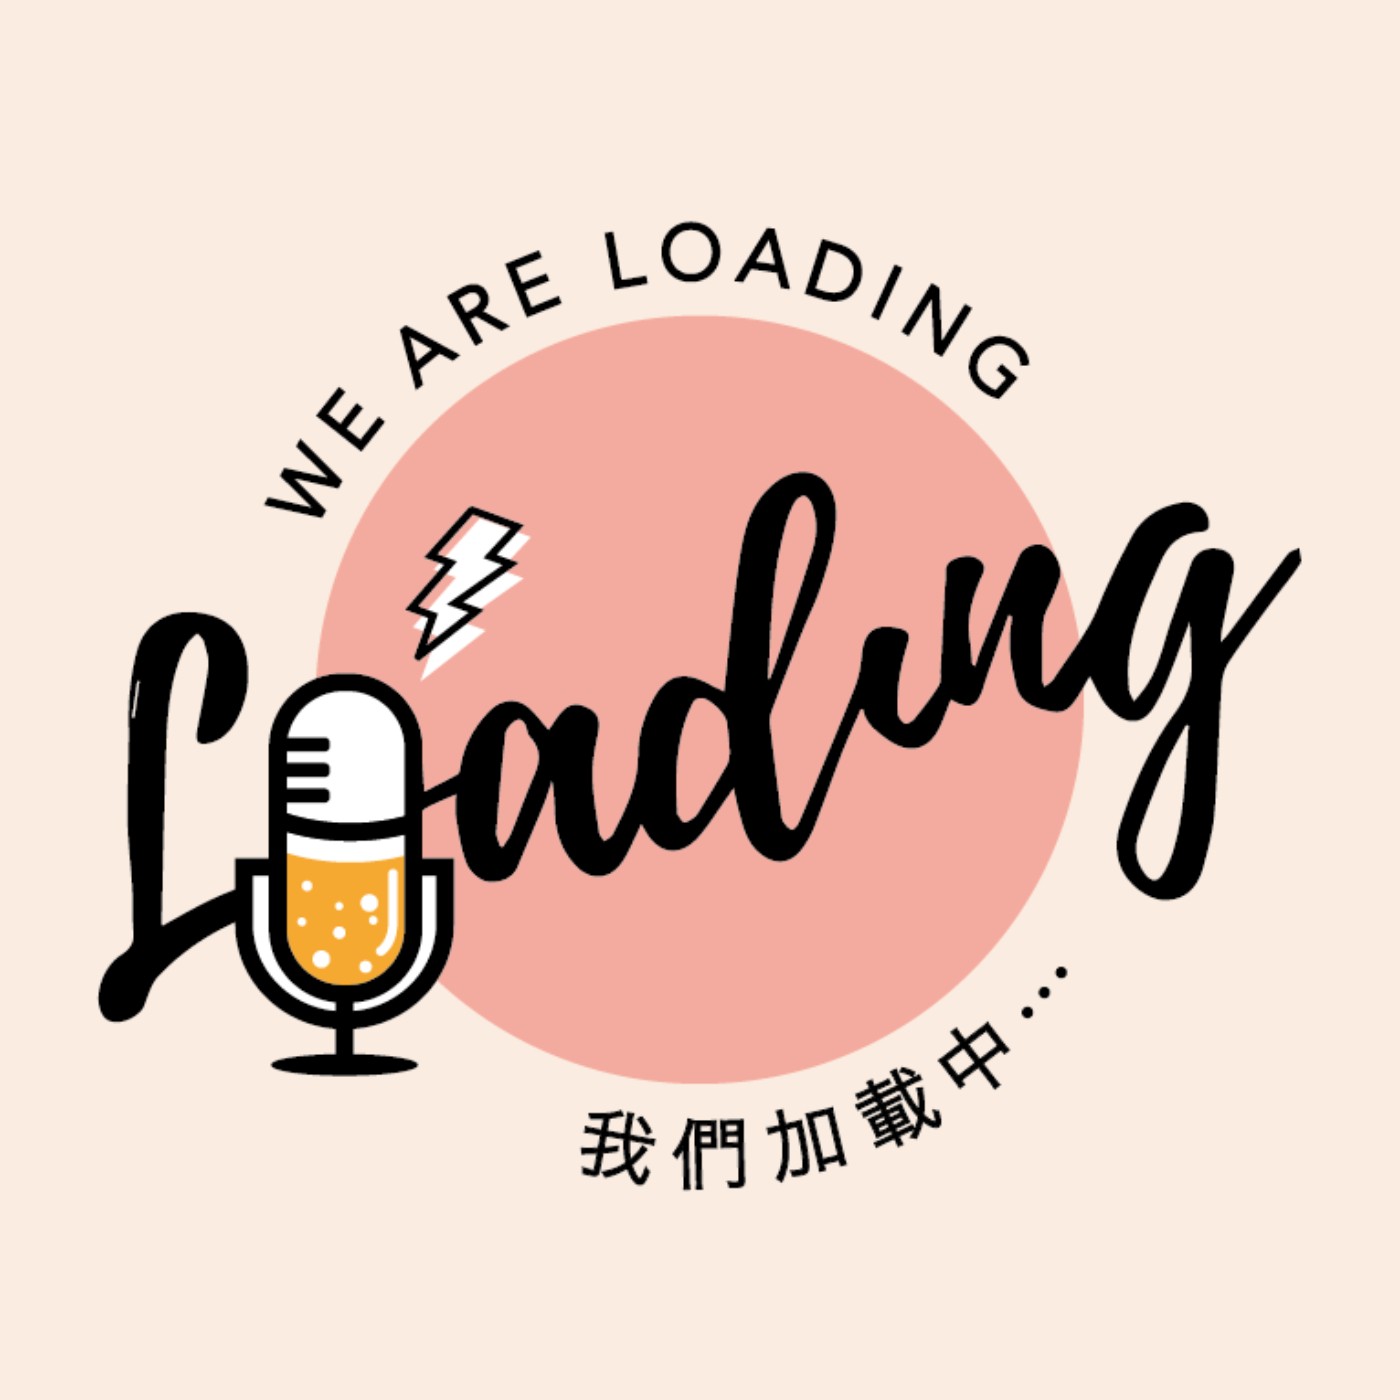 We are Loading我們加載中...